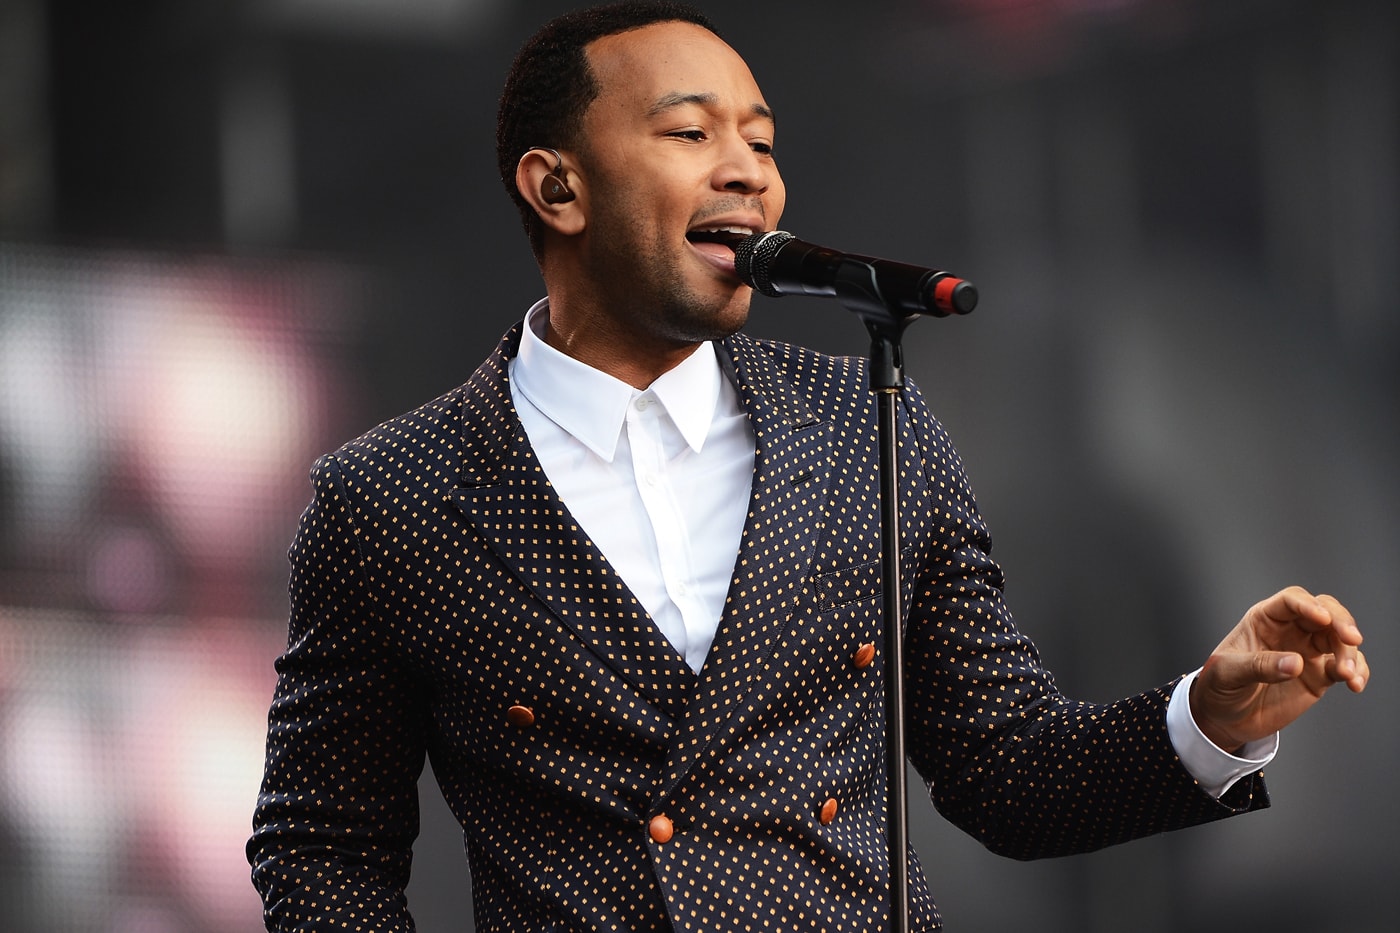 John Legend and Ariana Grande Will Sing the "Beauty and the Beast" Theme